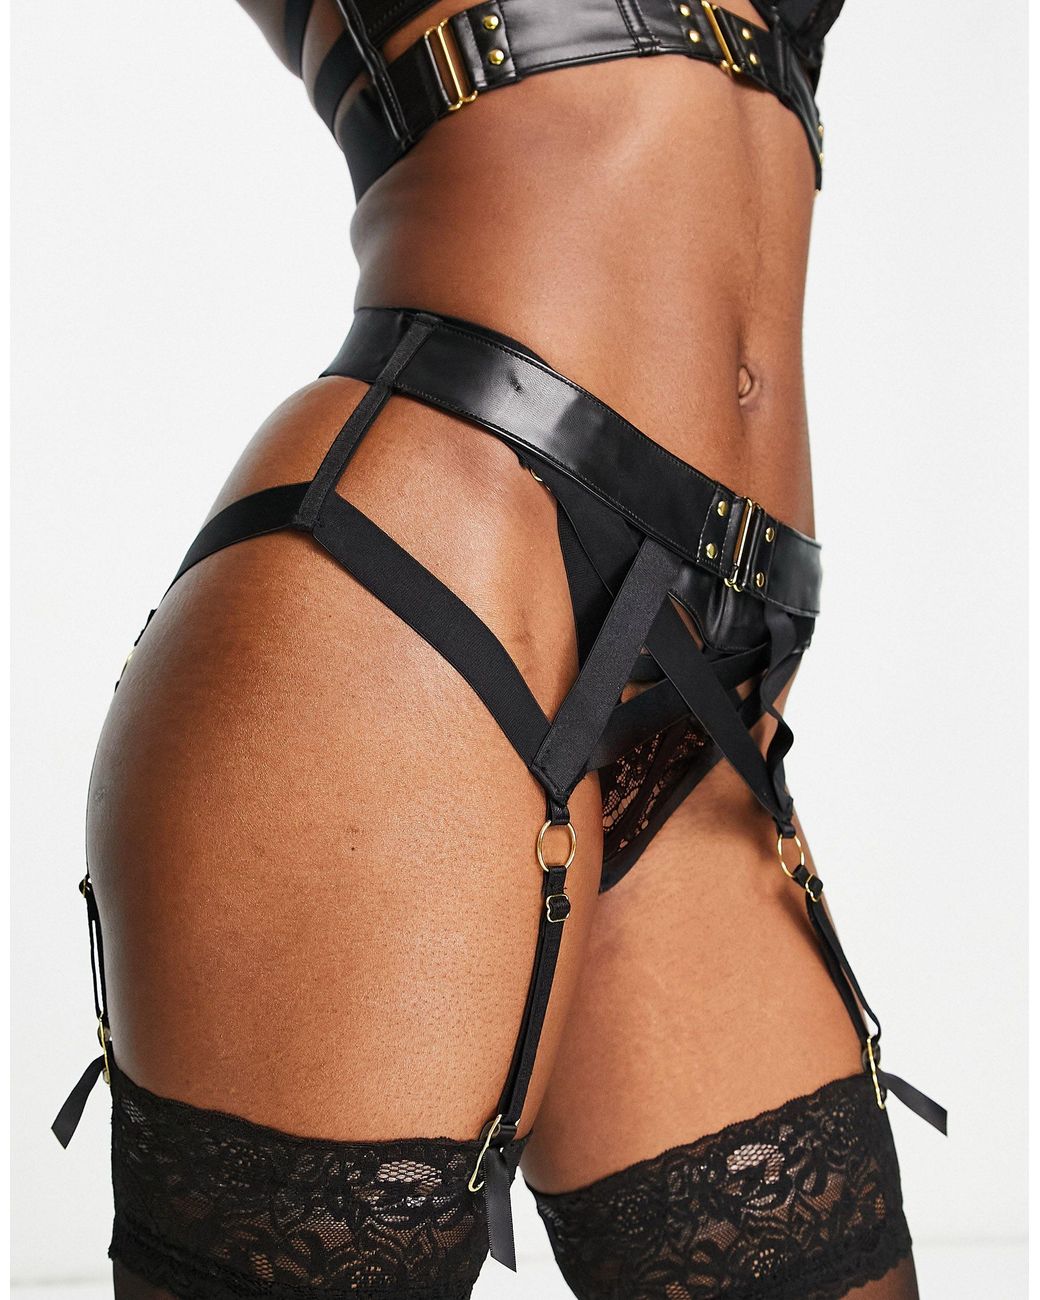 Hunkemöller Occult Pu And Lace Suspender Belt With Hardware Detail in Black  | Lyst